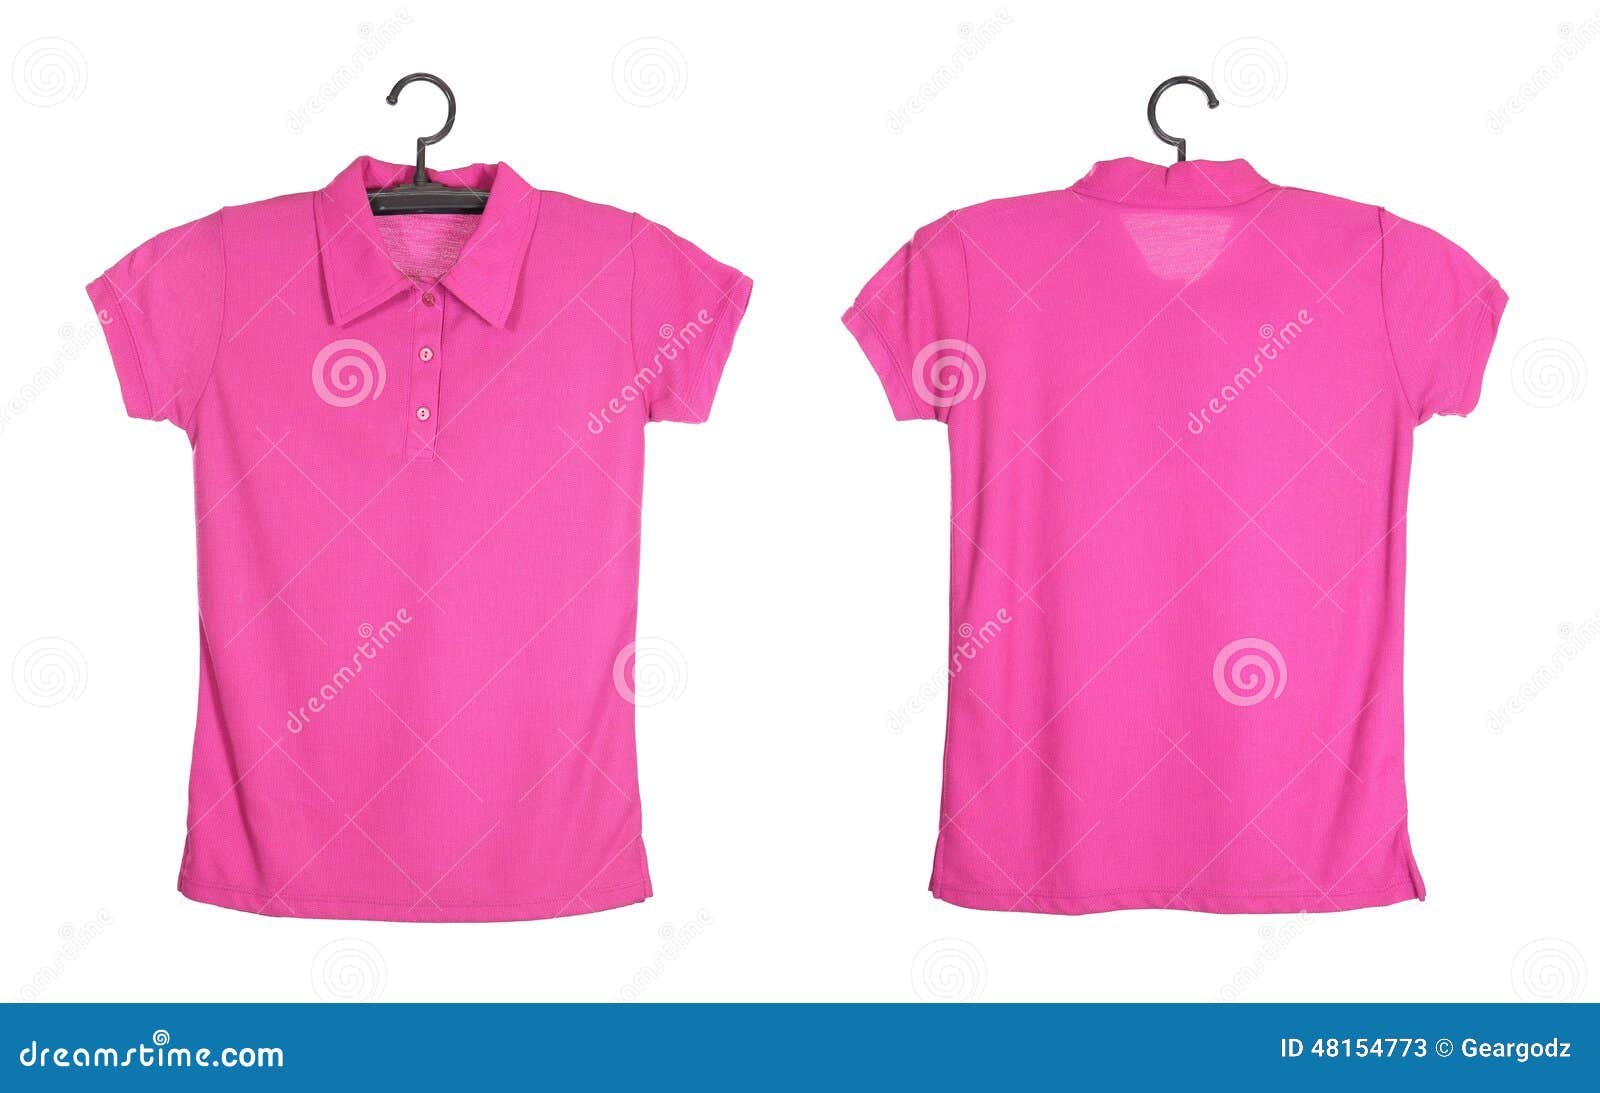 polo shirt template on hange  on white background